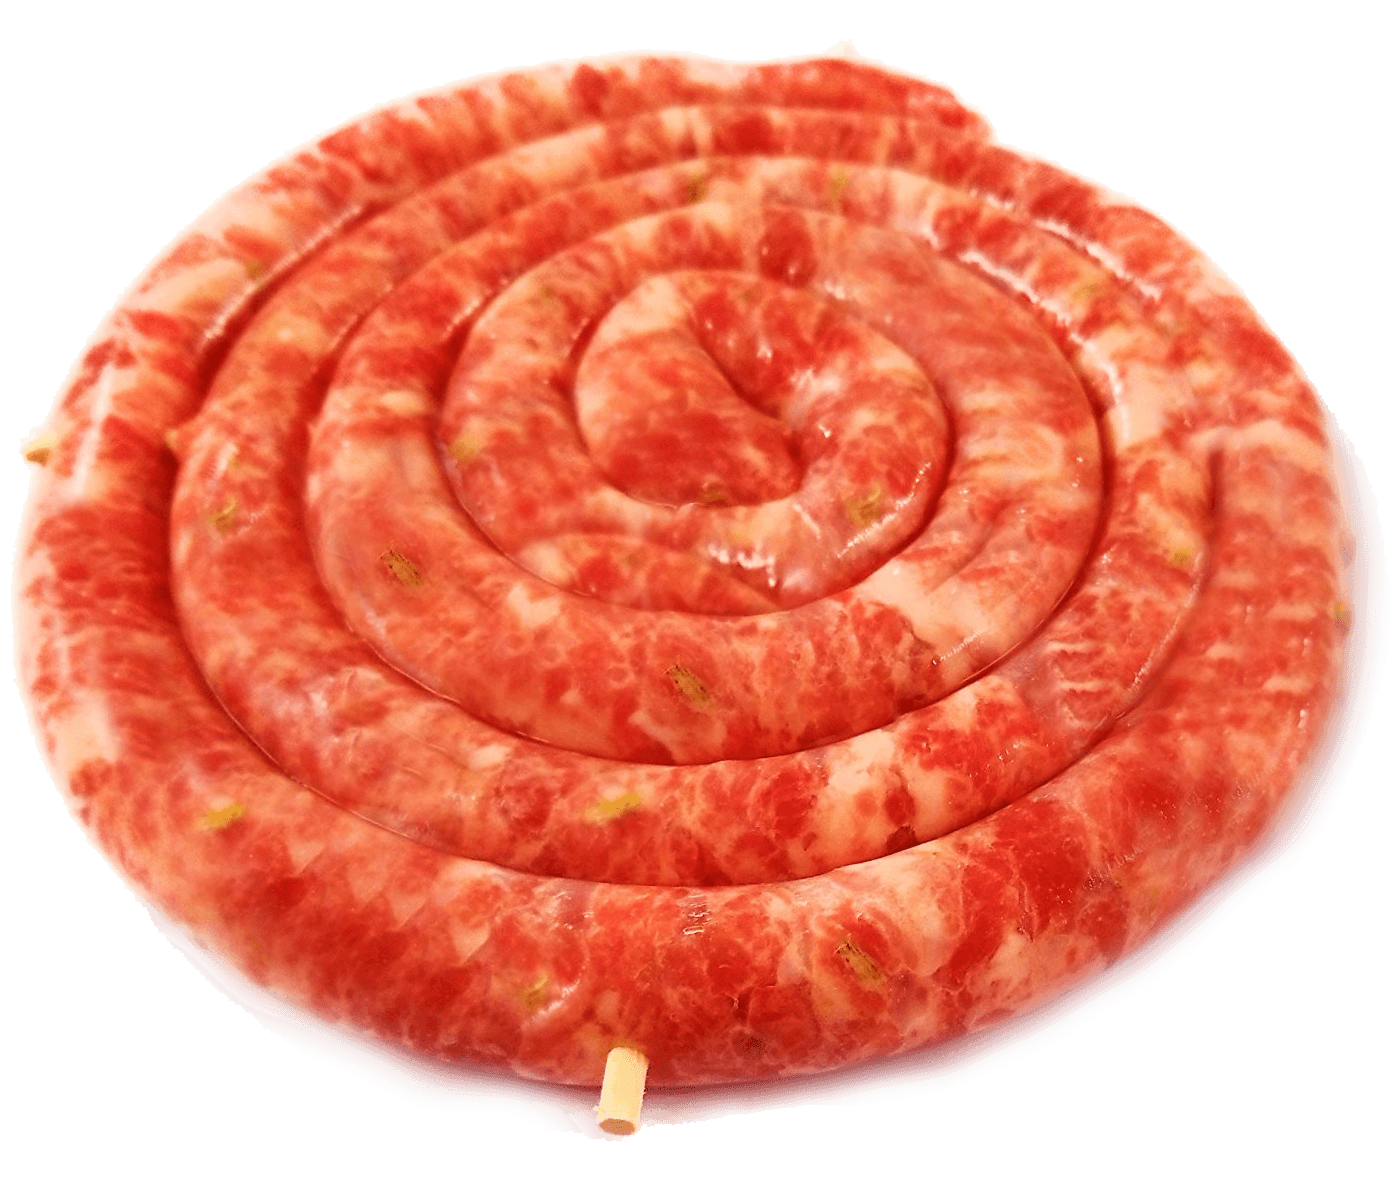 New York Italian Sausage Ring -  Made Fresh Daily 6 Rings - 8 Pounds  (Approximately 1 and a Quarter Pounds Each) Express Shipping Included  "Chevalatta"